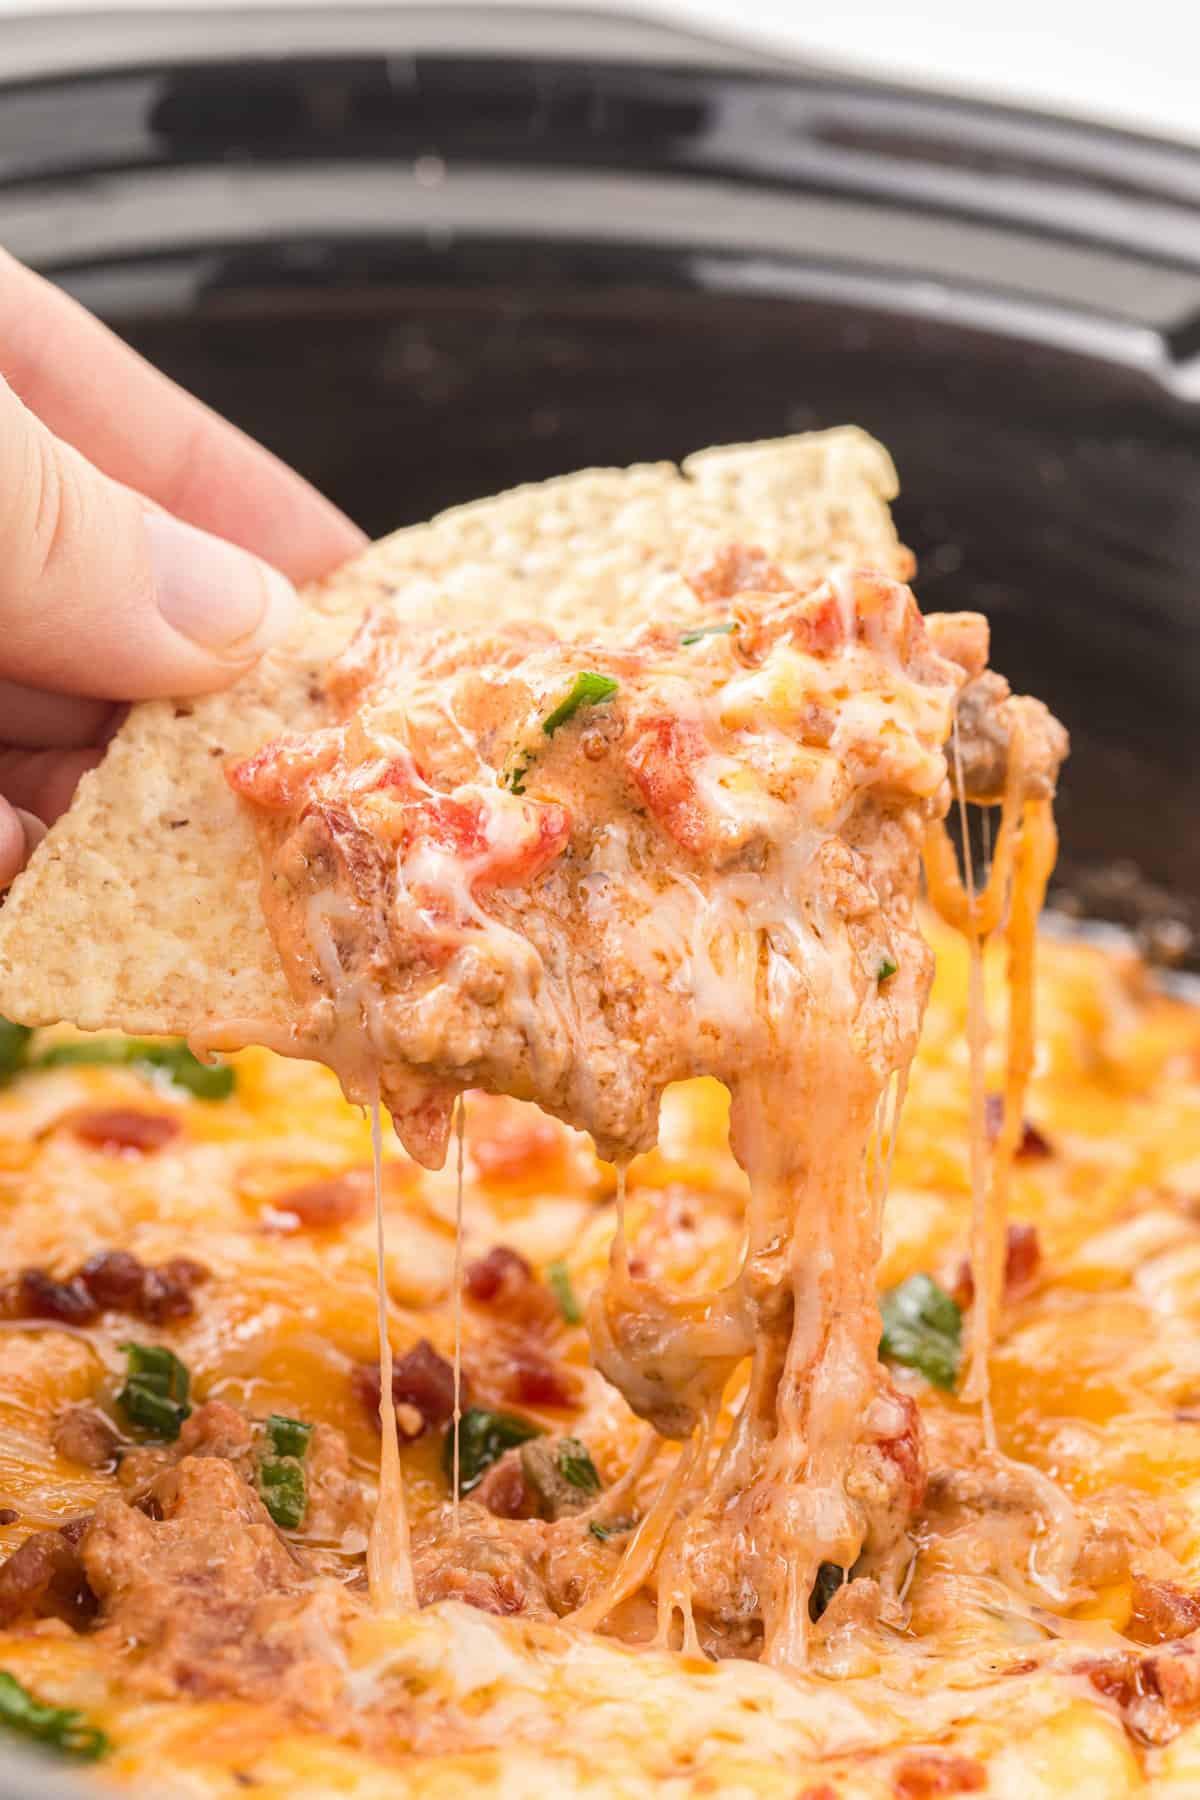 Tortilla chip scooping cheeseburger crock pot dip with lots of melted cheese.